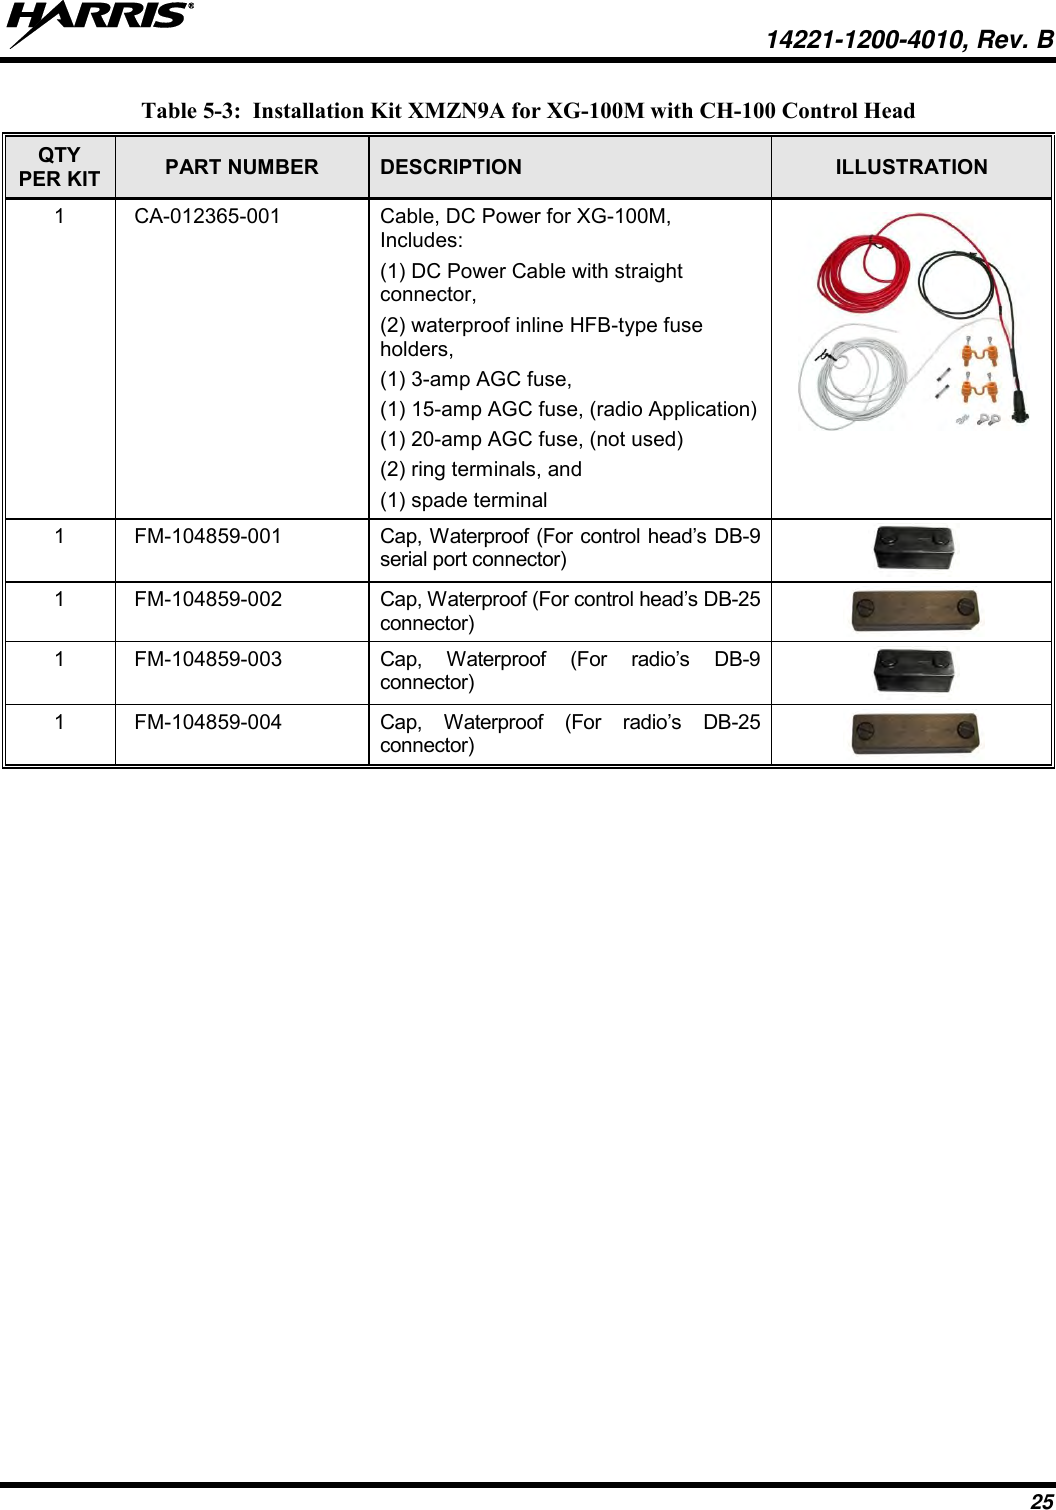   14221-1200-4010, Rev. B 25 Table 5-3:  Installation Kit XMZN9A for XG-100M with CH-100 Control Head QTY PER KIT PART NUMBER DESCRIPTION ILLUSTRATION 1 CA-012365-001 Cable, DC Power for XG-100M, Includes:  (1) DC Power Cable with straight connector,  (2) waterproof inline HFB-type fuse holders,  (1) 3-amp AGC fuse,  (1) 15-amp AGC fuse, (radio Application) (1) 20-amp AGC fuse, (not used) (2) ring terminals, and (1) spade terminal  1 FM-104859-001 Cap, Waterproof (For control head’s DB-9 serial port connector)  1 FM-104859-002 Cap, Waterproof (For control head’s DB-25 connector)  1 FM-104859-003 Cap,  Waterproof  (For  radio’s  DB-9 connector)  1 FM-104859-004 Cap,  Waterproof  (For  radio’s  DB-25 connector)    